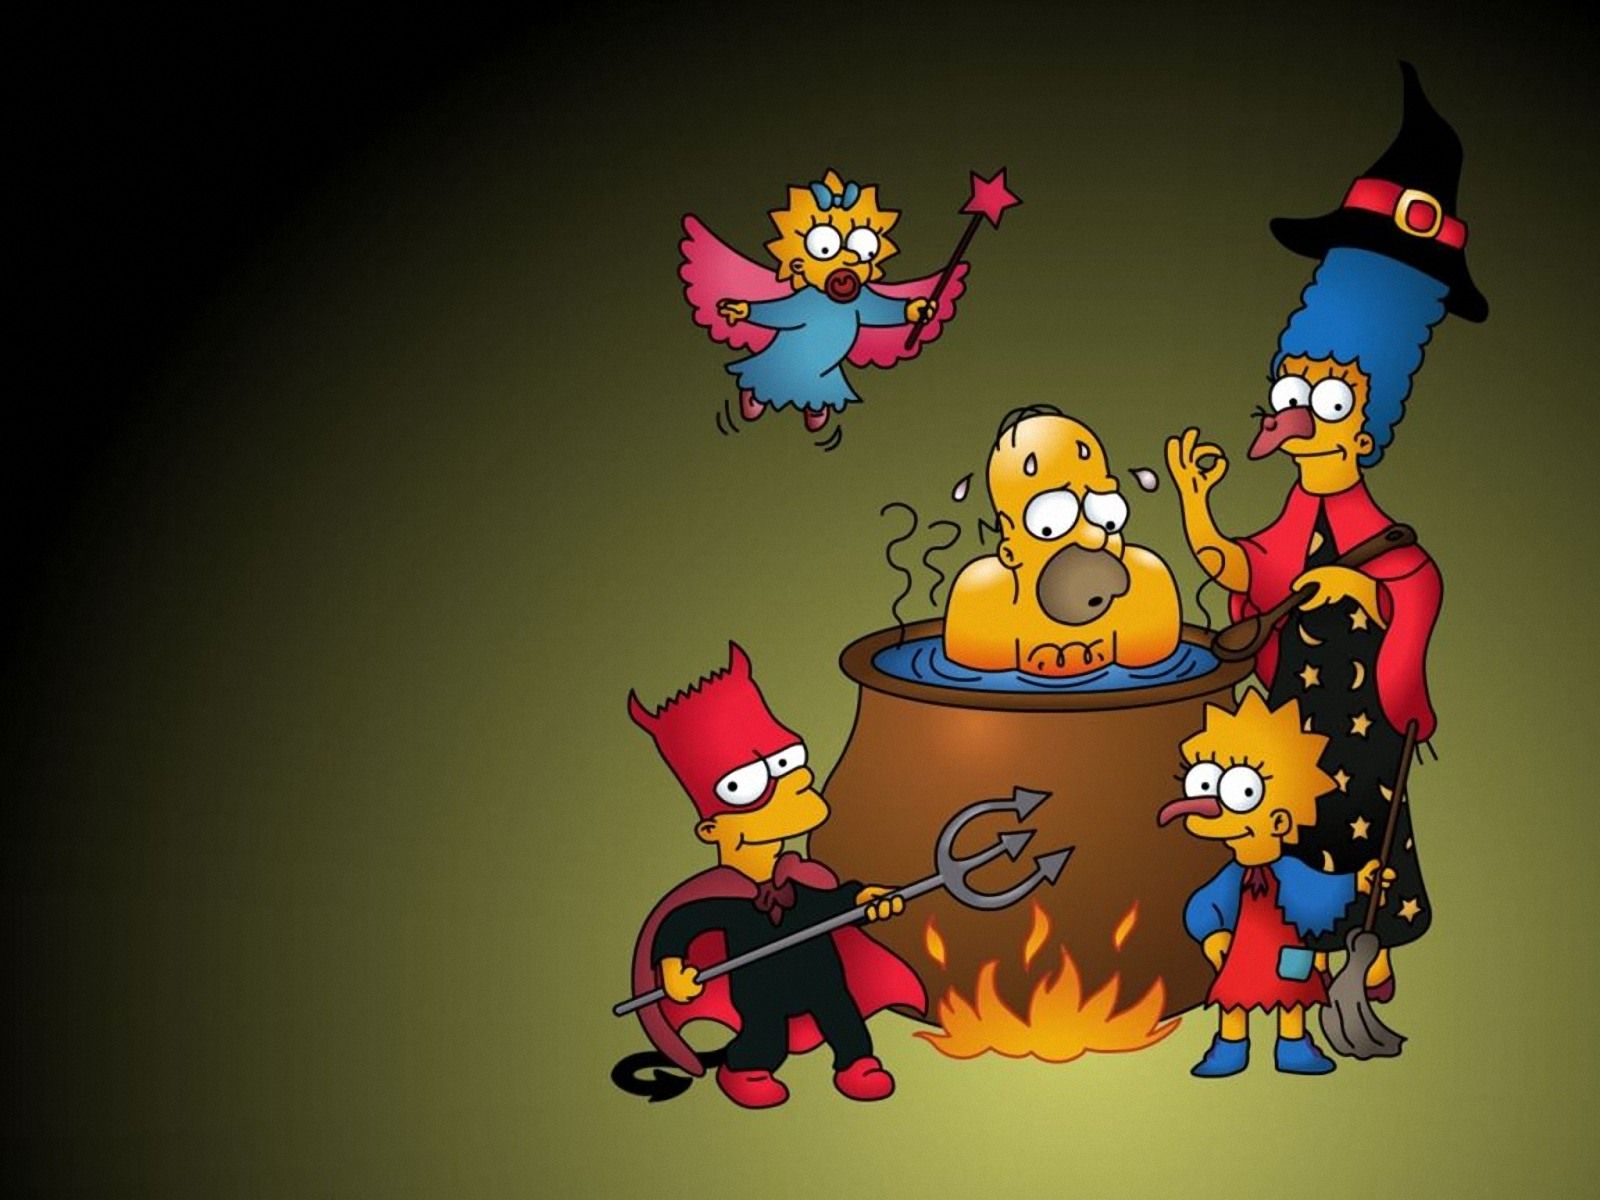 HD Wallpaper The Simpsons Family